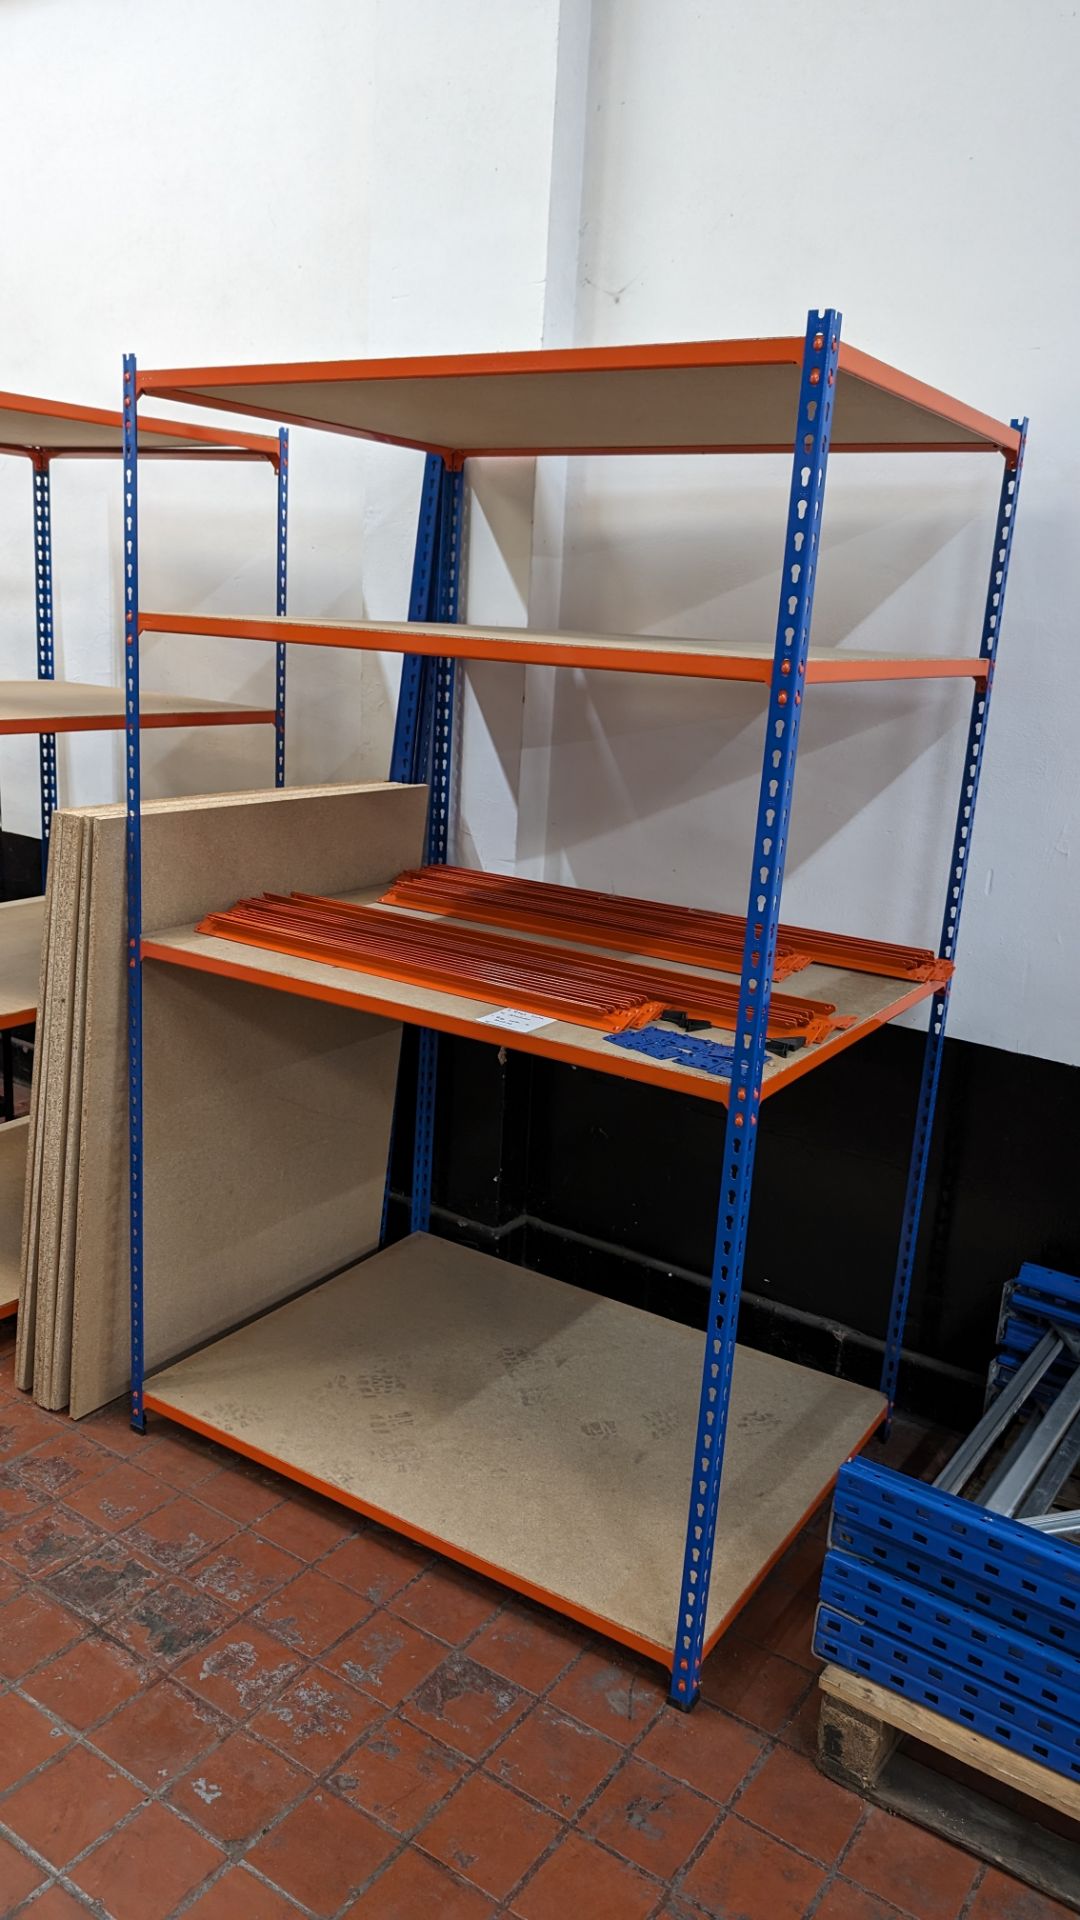 4 off bays of Rapid Racking blue and orange racking, each with four shelves. One bay has a footprin - Bild 5 aus 8